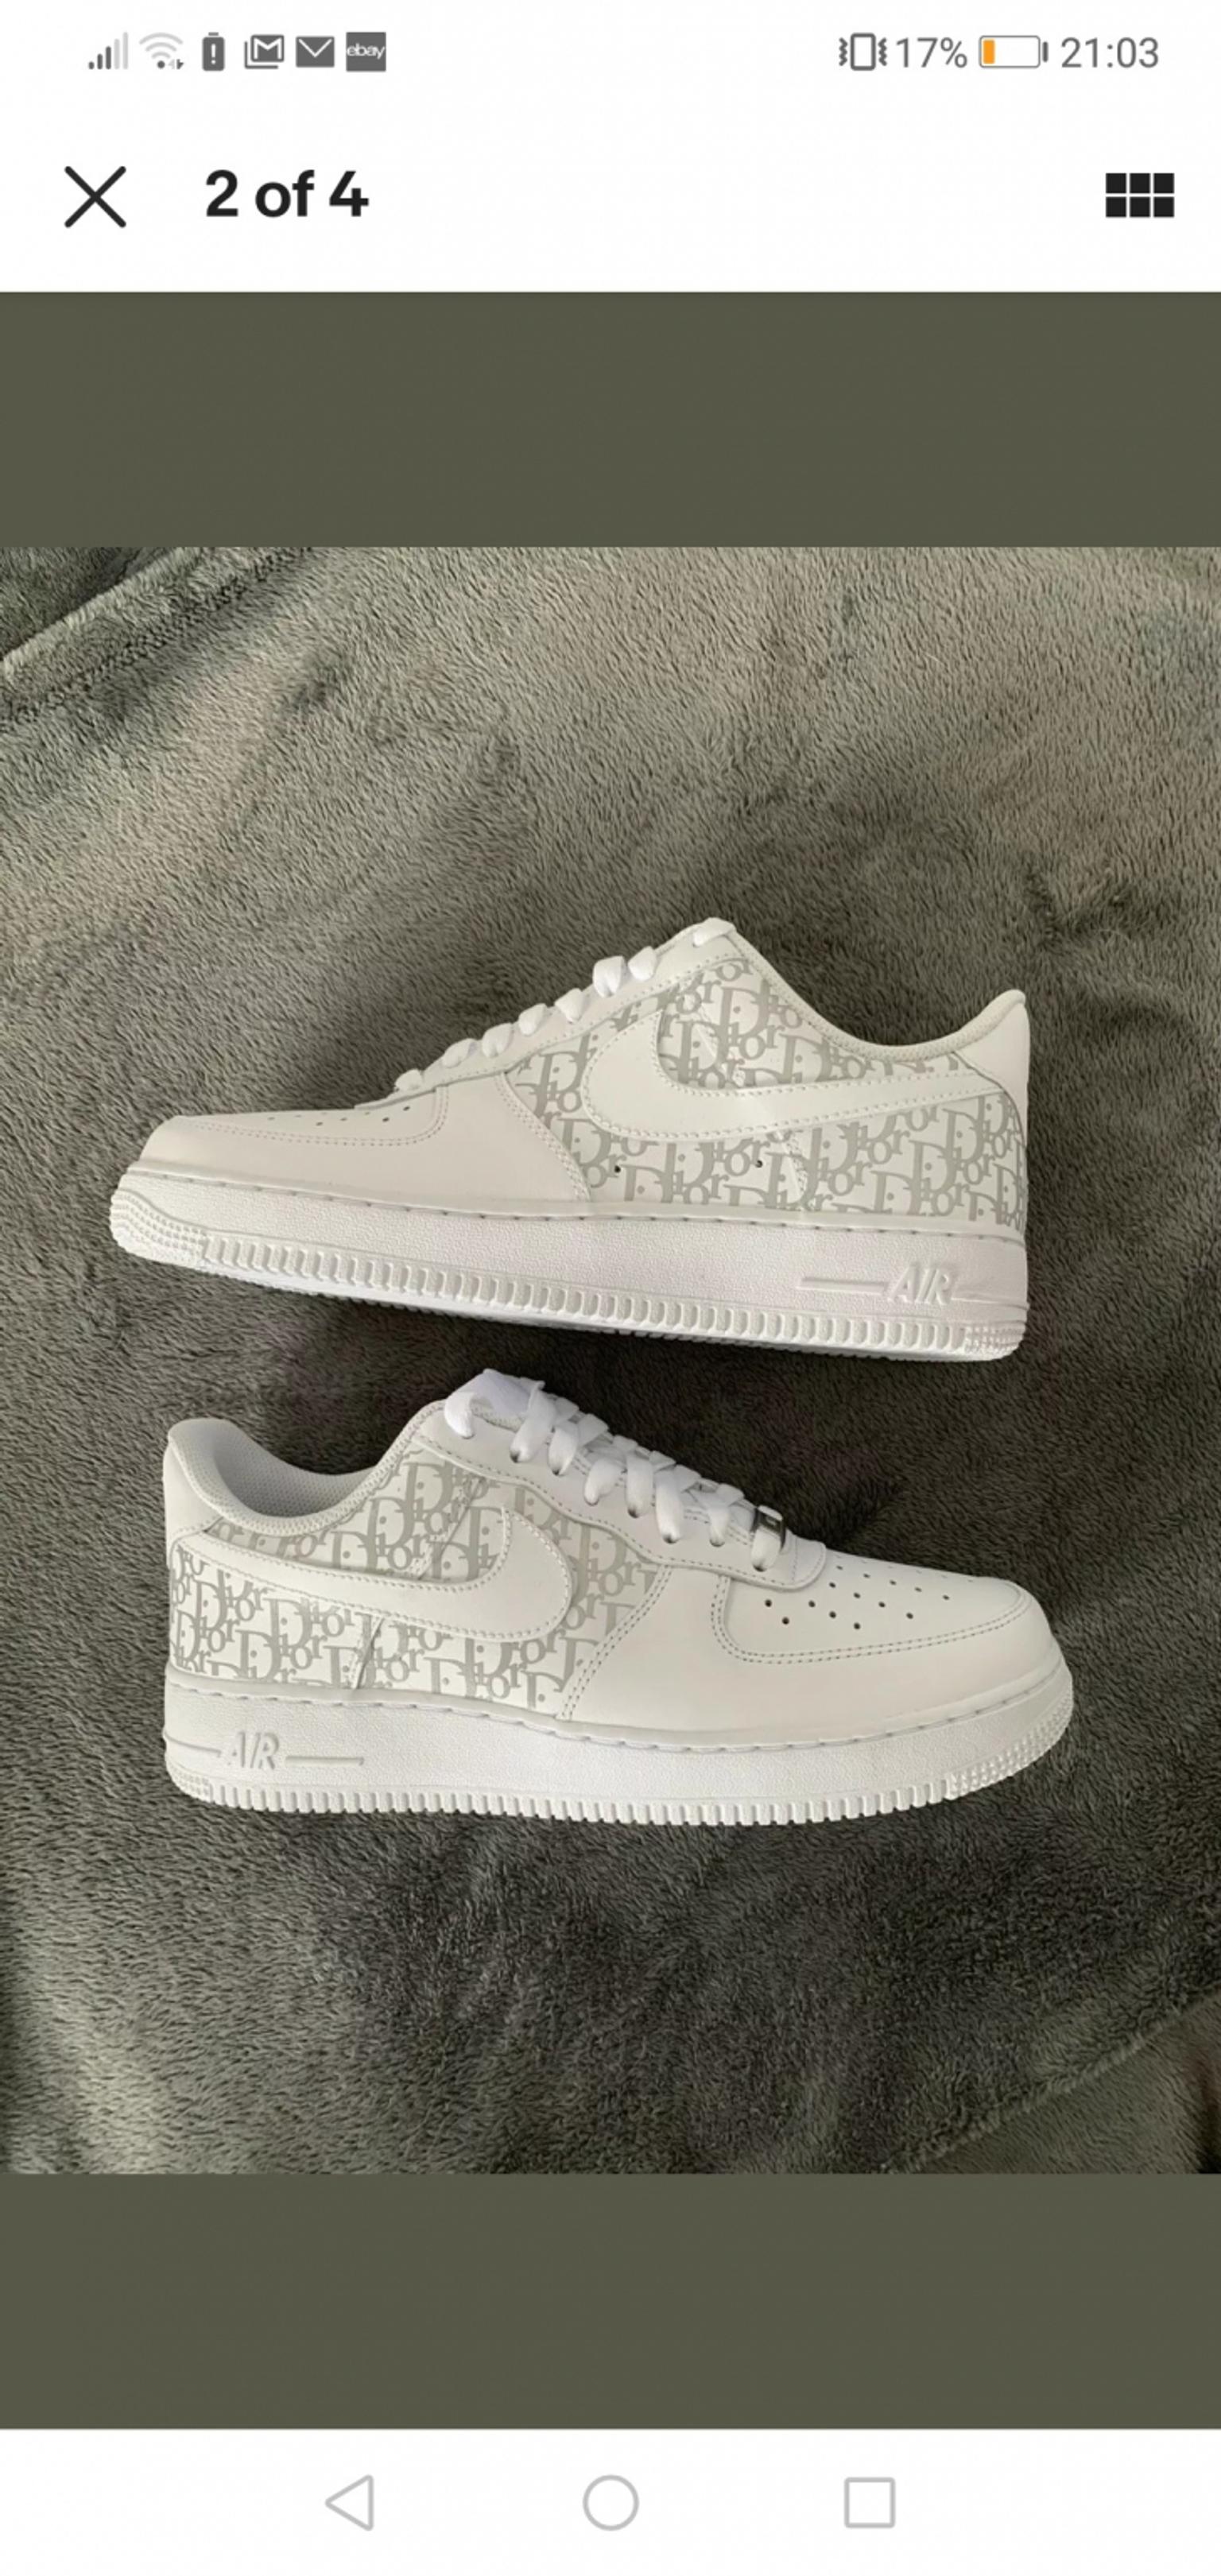 white nike air force 1 size 7.5